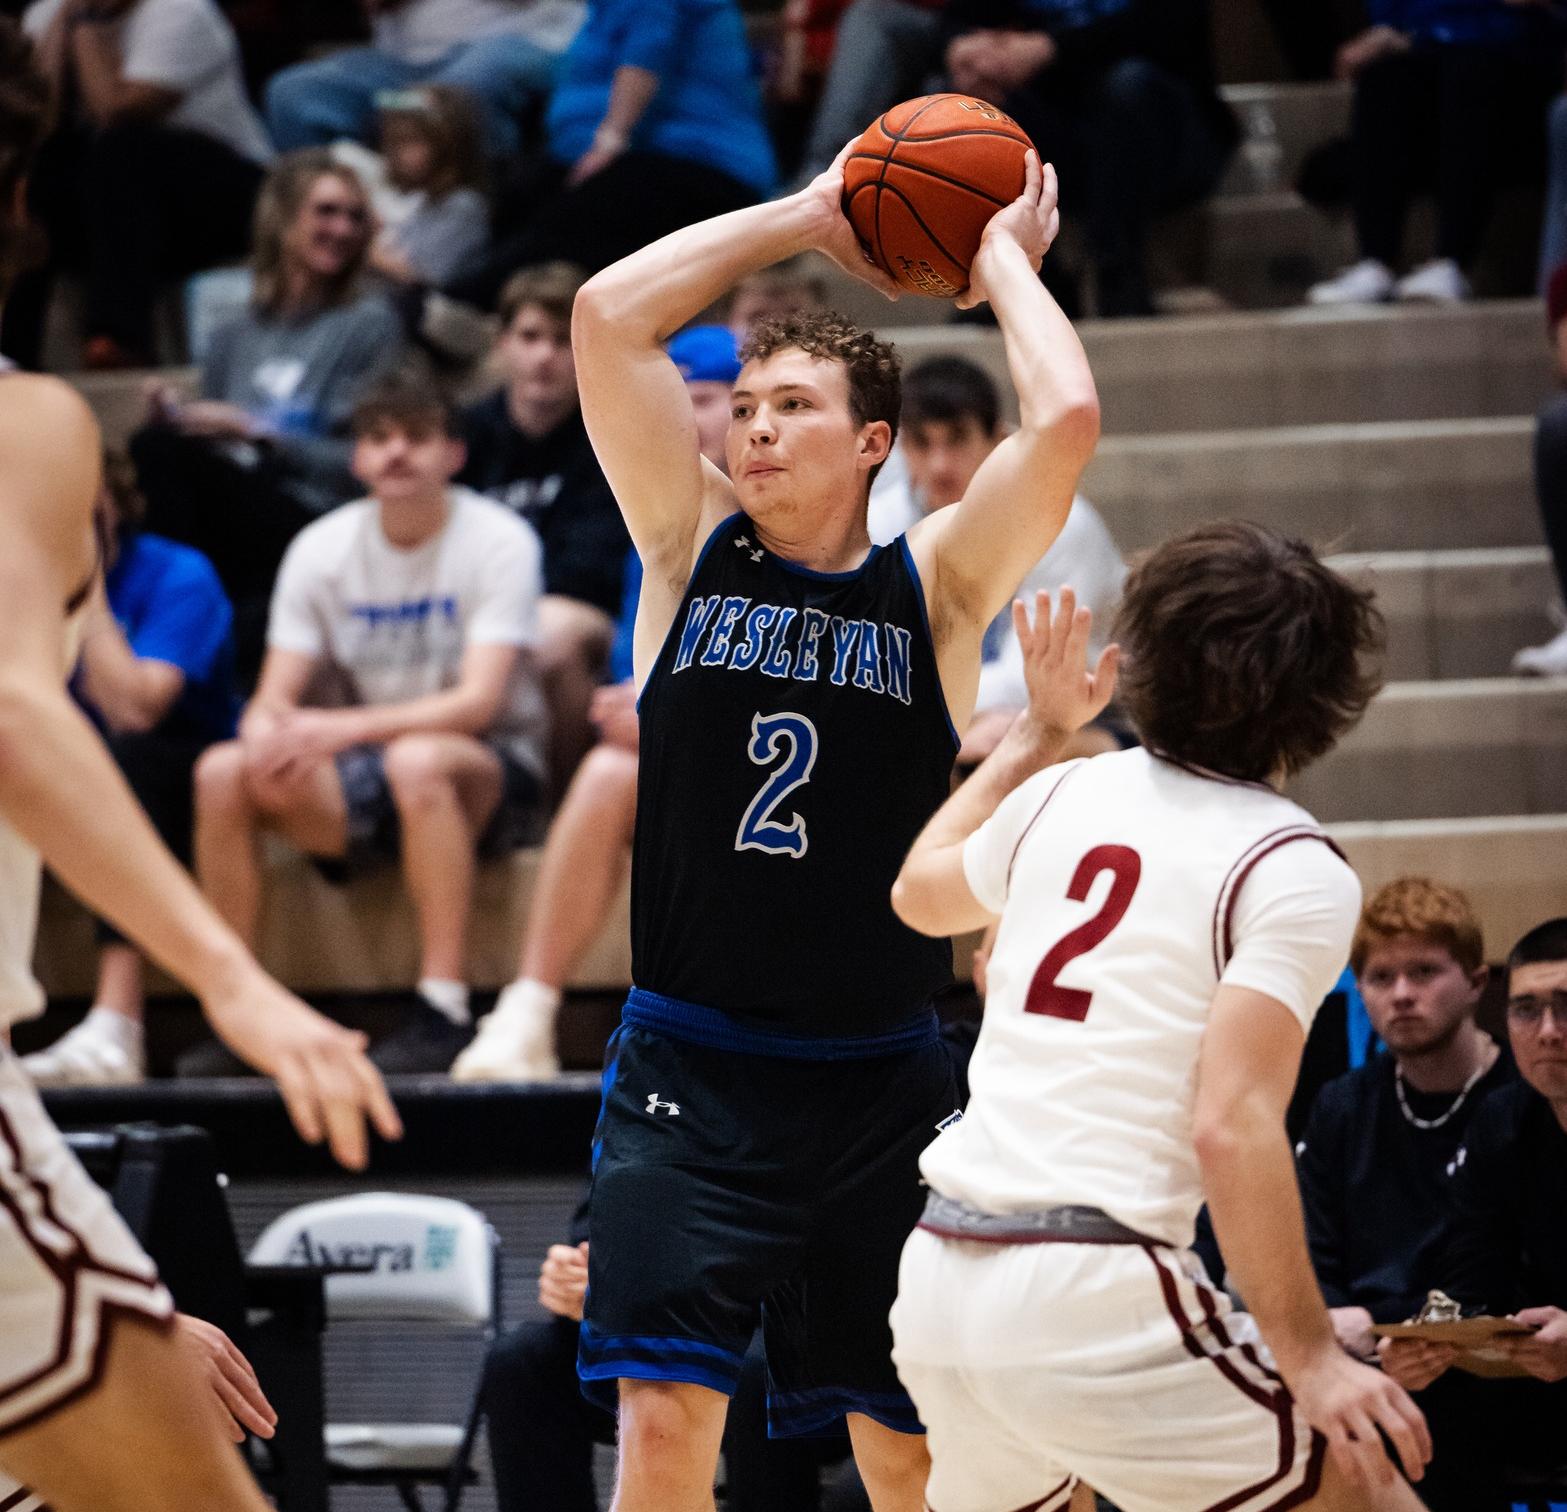 LUBBERS DOUBLE-DOULBE PUSHES DWU TO 64-46 WIN OVER DOANE